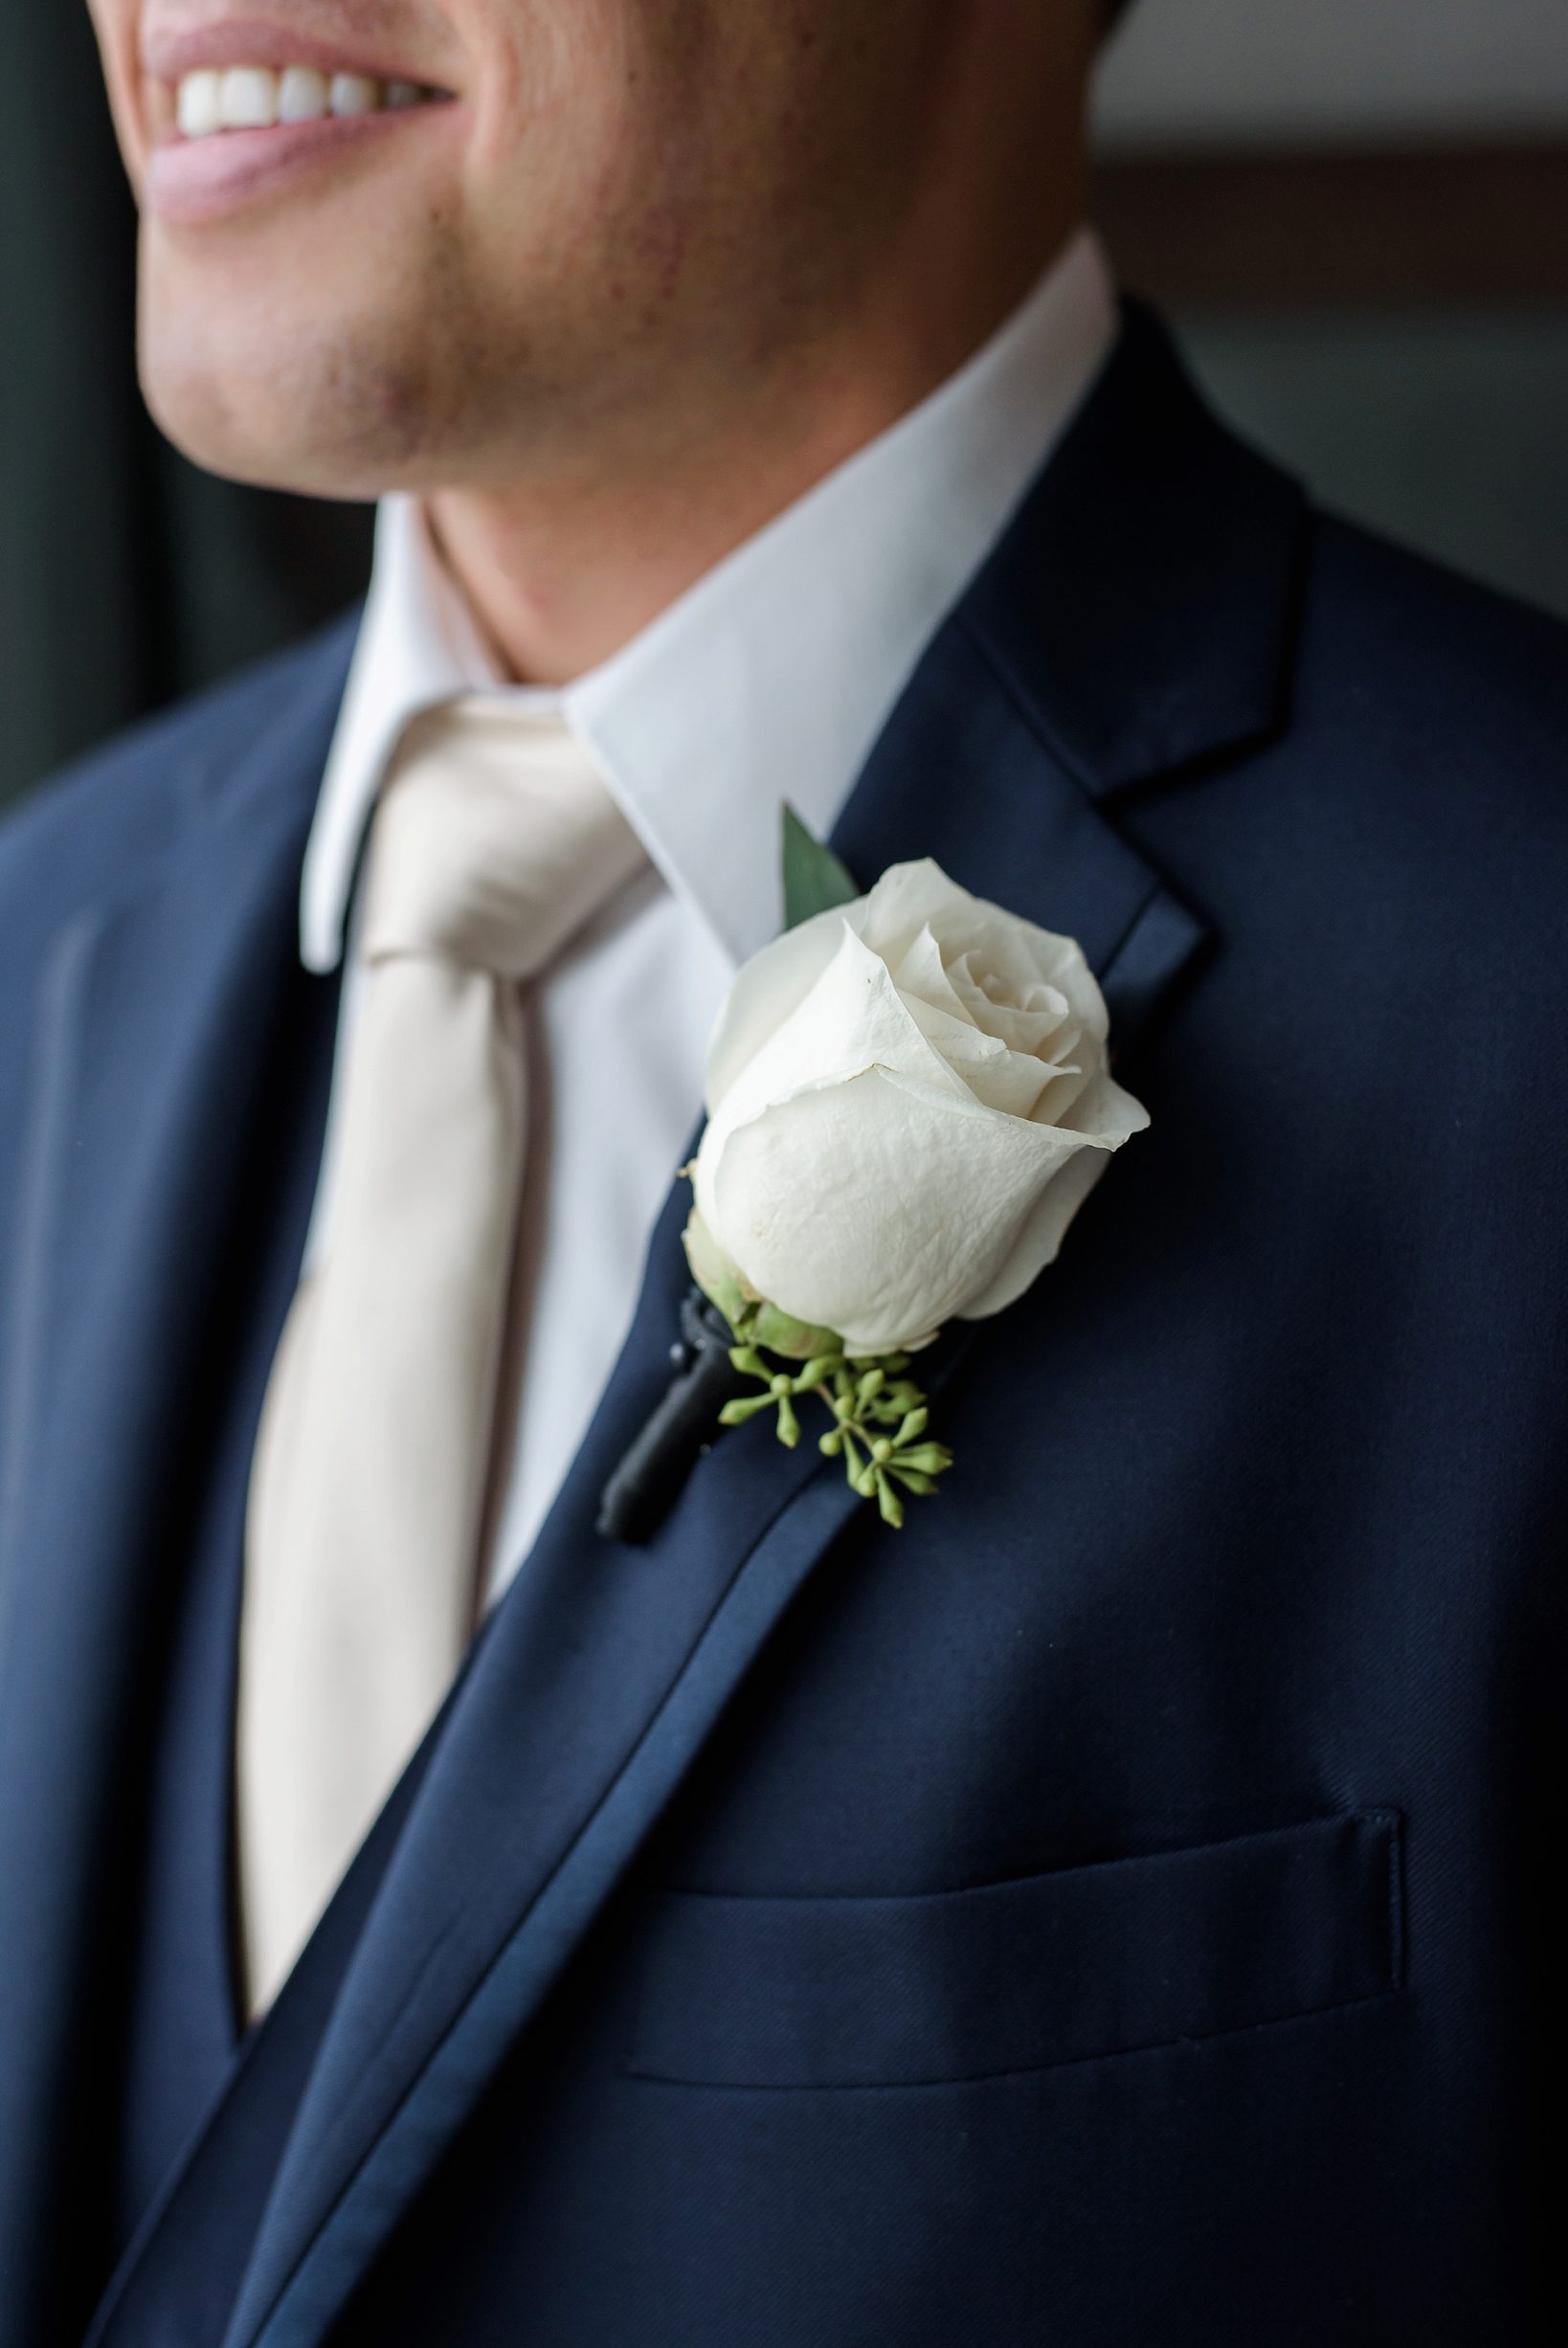 The groom's boutonniere of a white rose against his navy suit looked great 